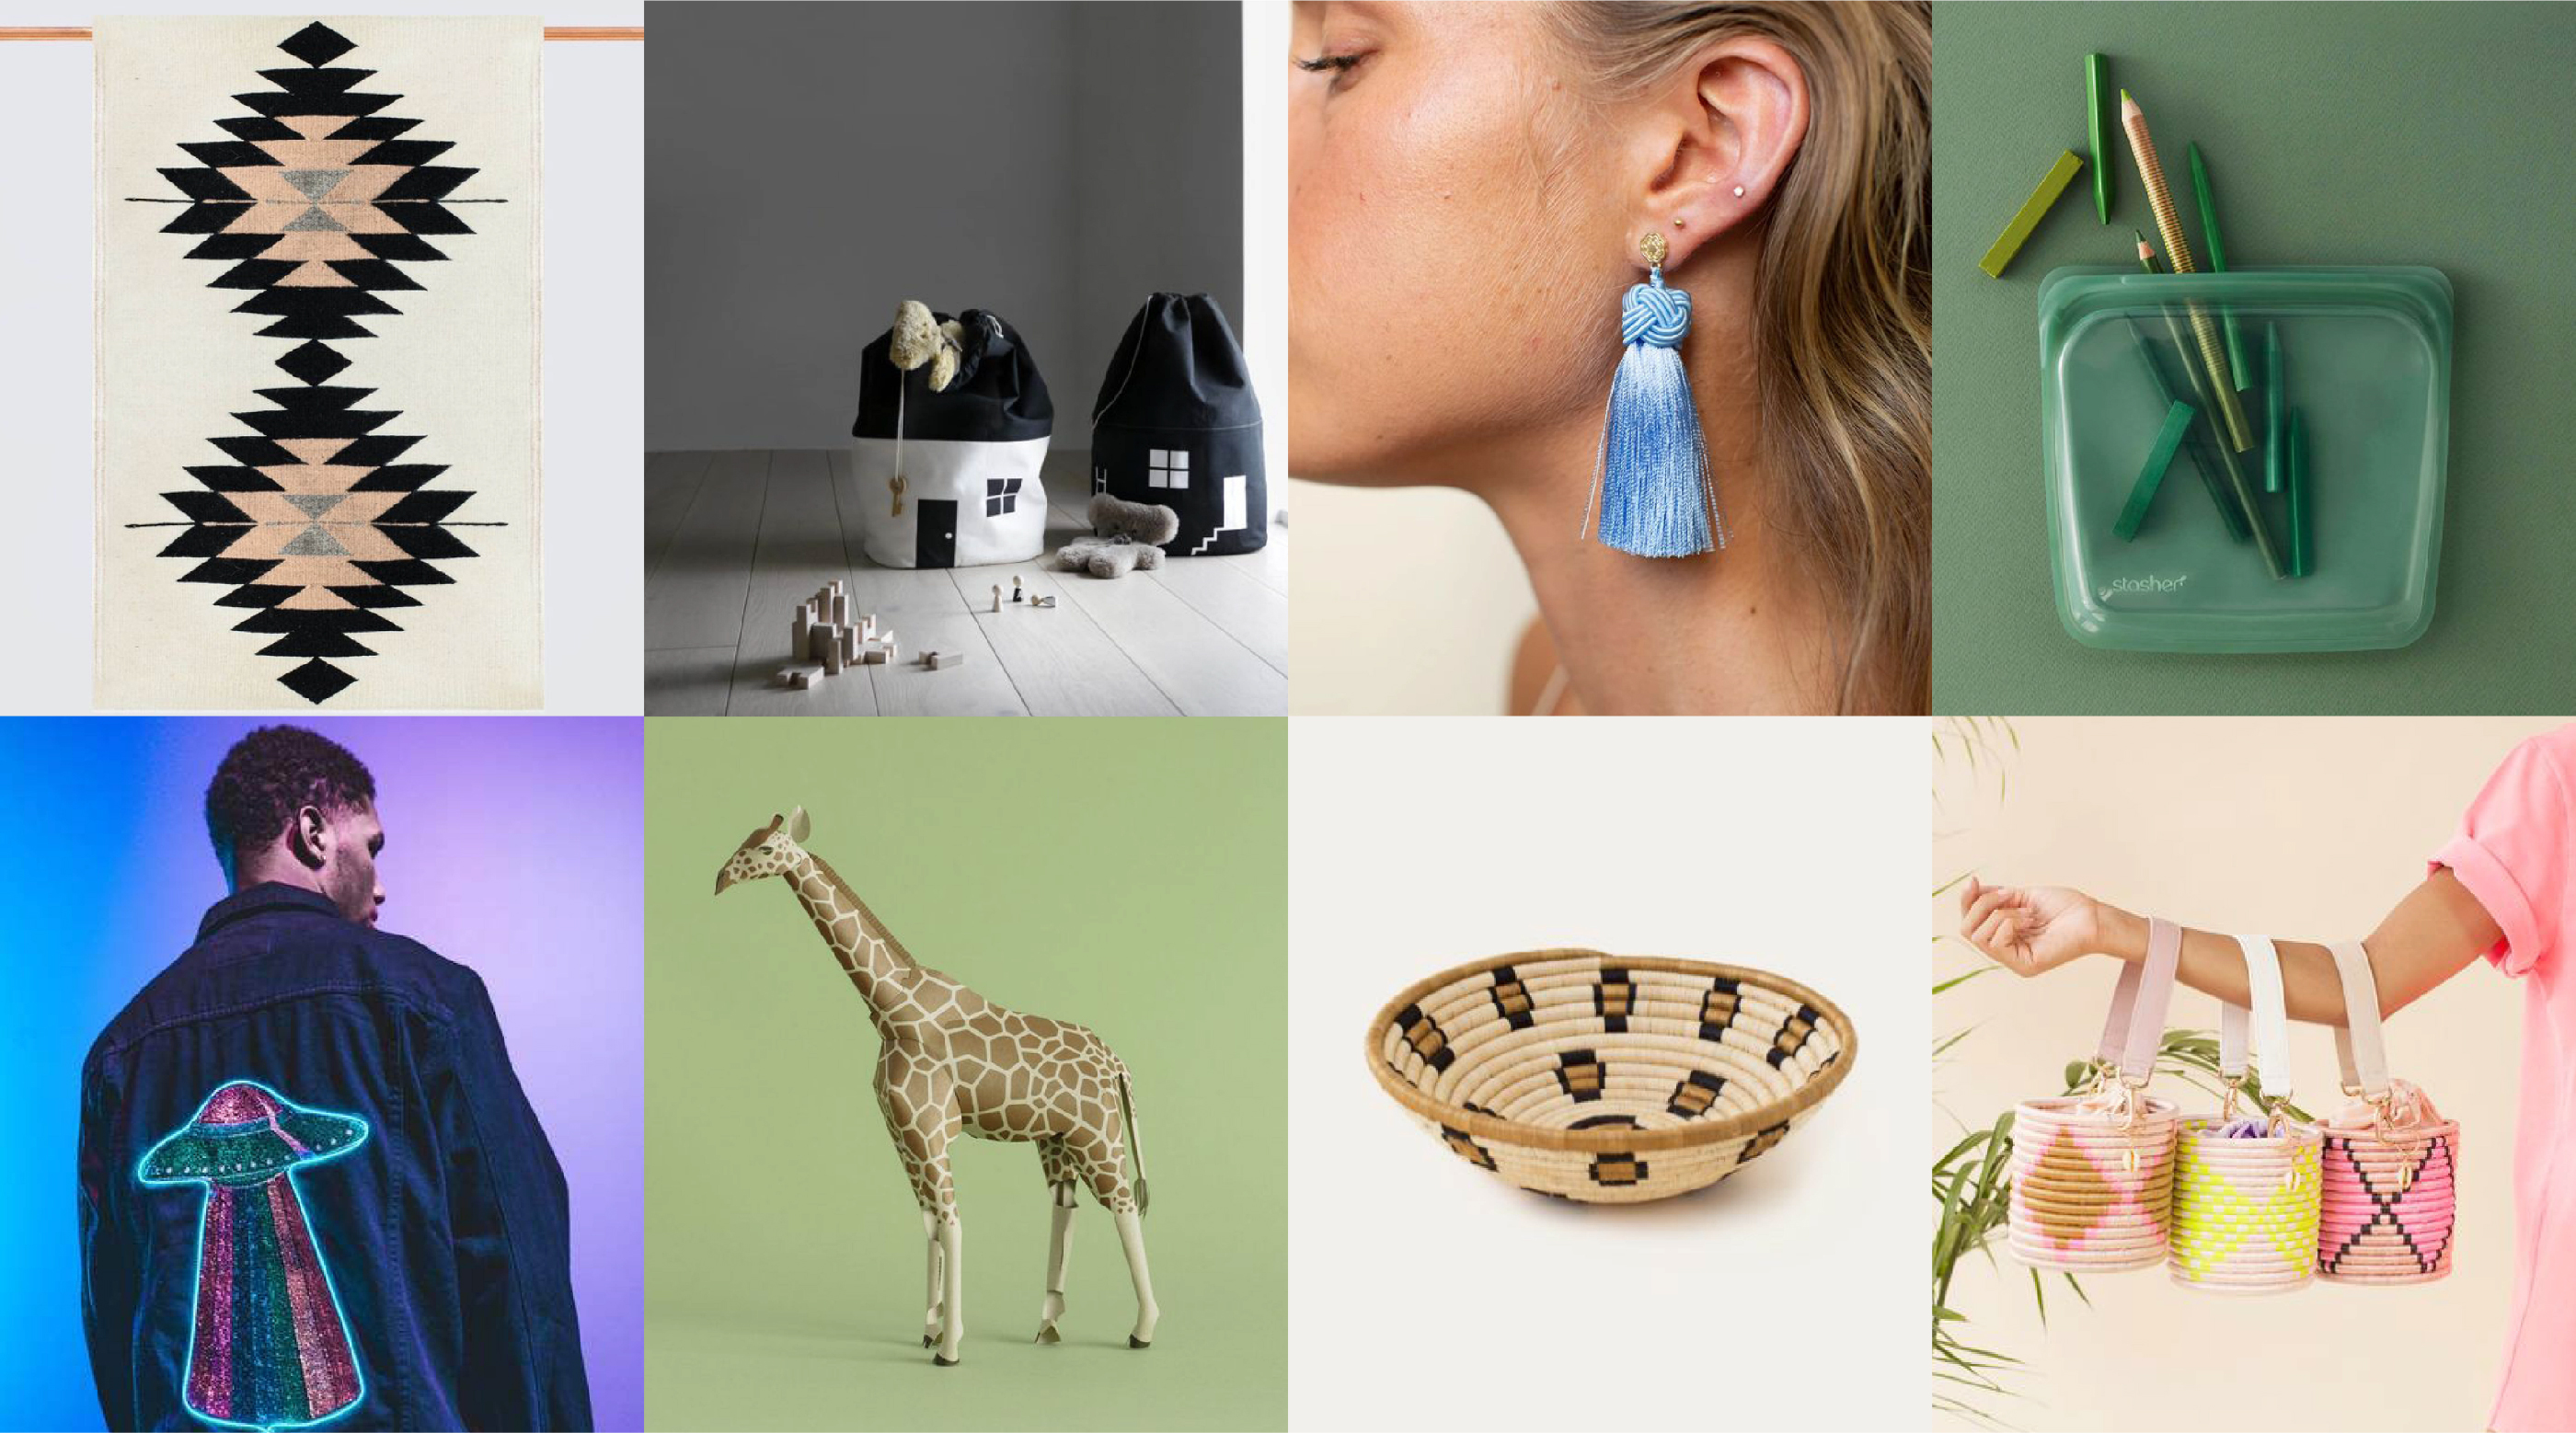 Photo of 8 products sold on the Pinterest Shop (carpet, toy, earring, basket, bag, coat, toy giraffe)